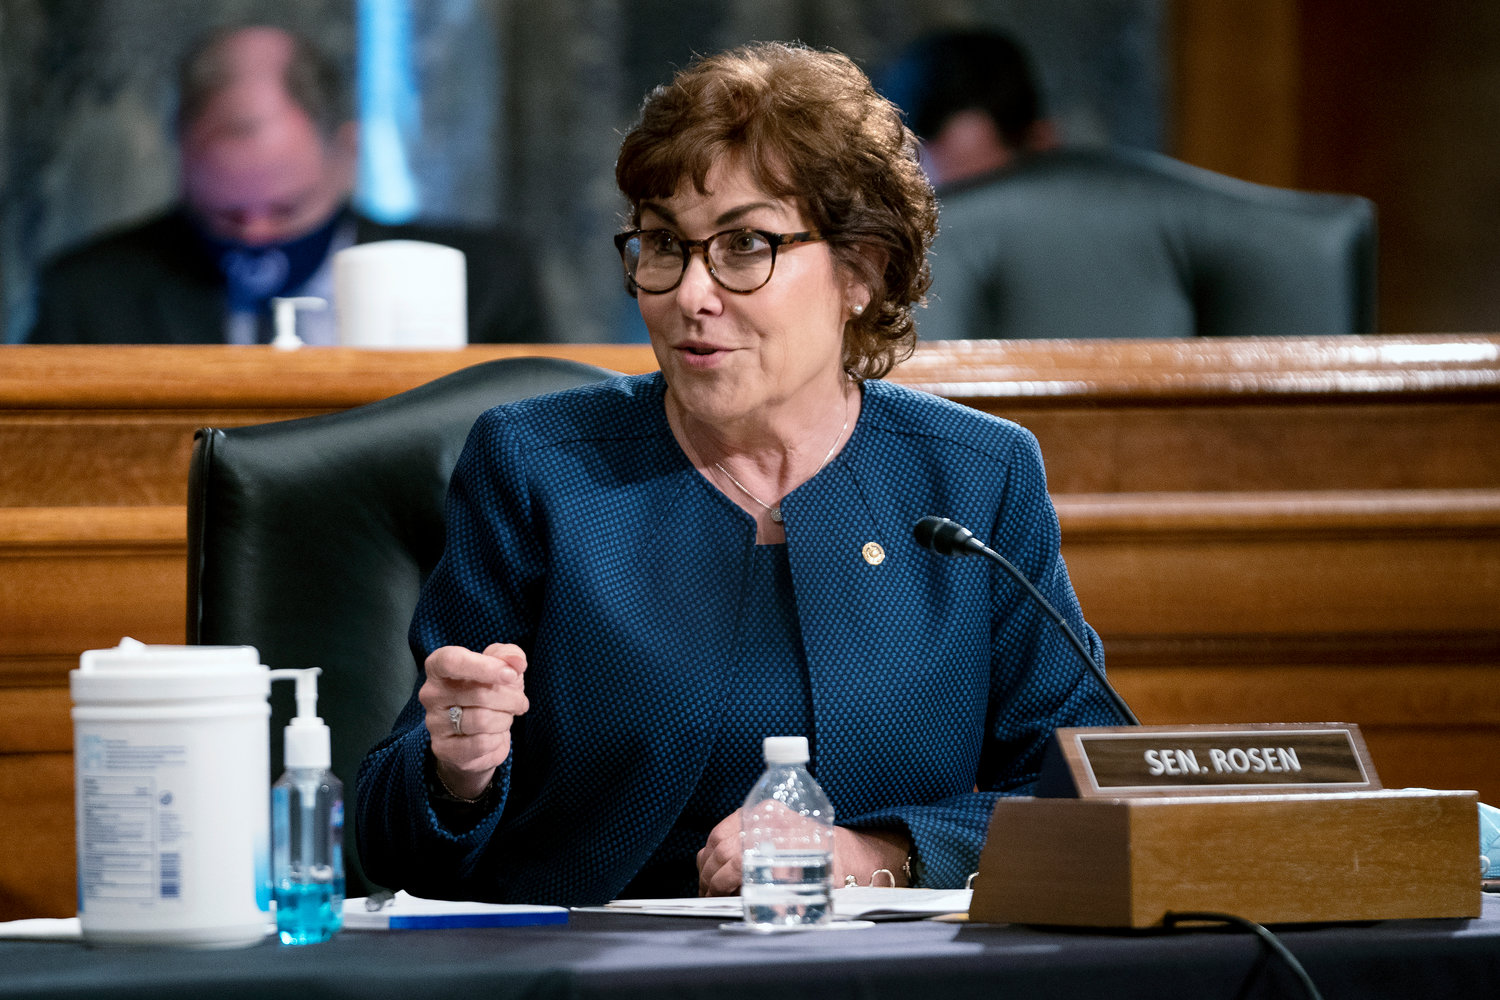 Sen. Jacky Rosen, D-Nev., speaks during a Senate Homeland Security and Governmental Affairs Committee hearing to discuss security threats 20 years after the 9/11 terrorist attacks, Sept. 21, 2021 on Capitol Hill in Washington. Rosen will up for reelection in 2024.